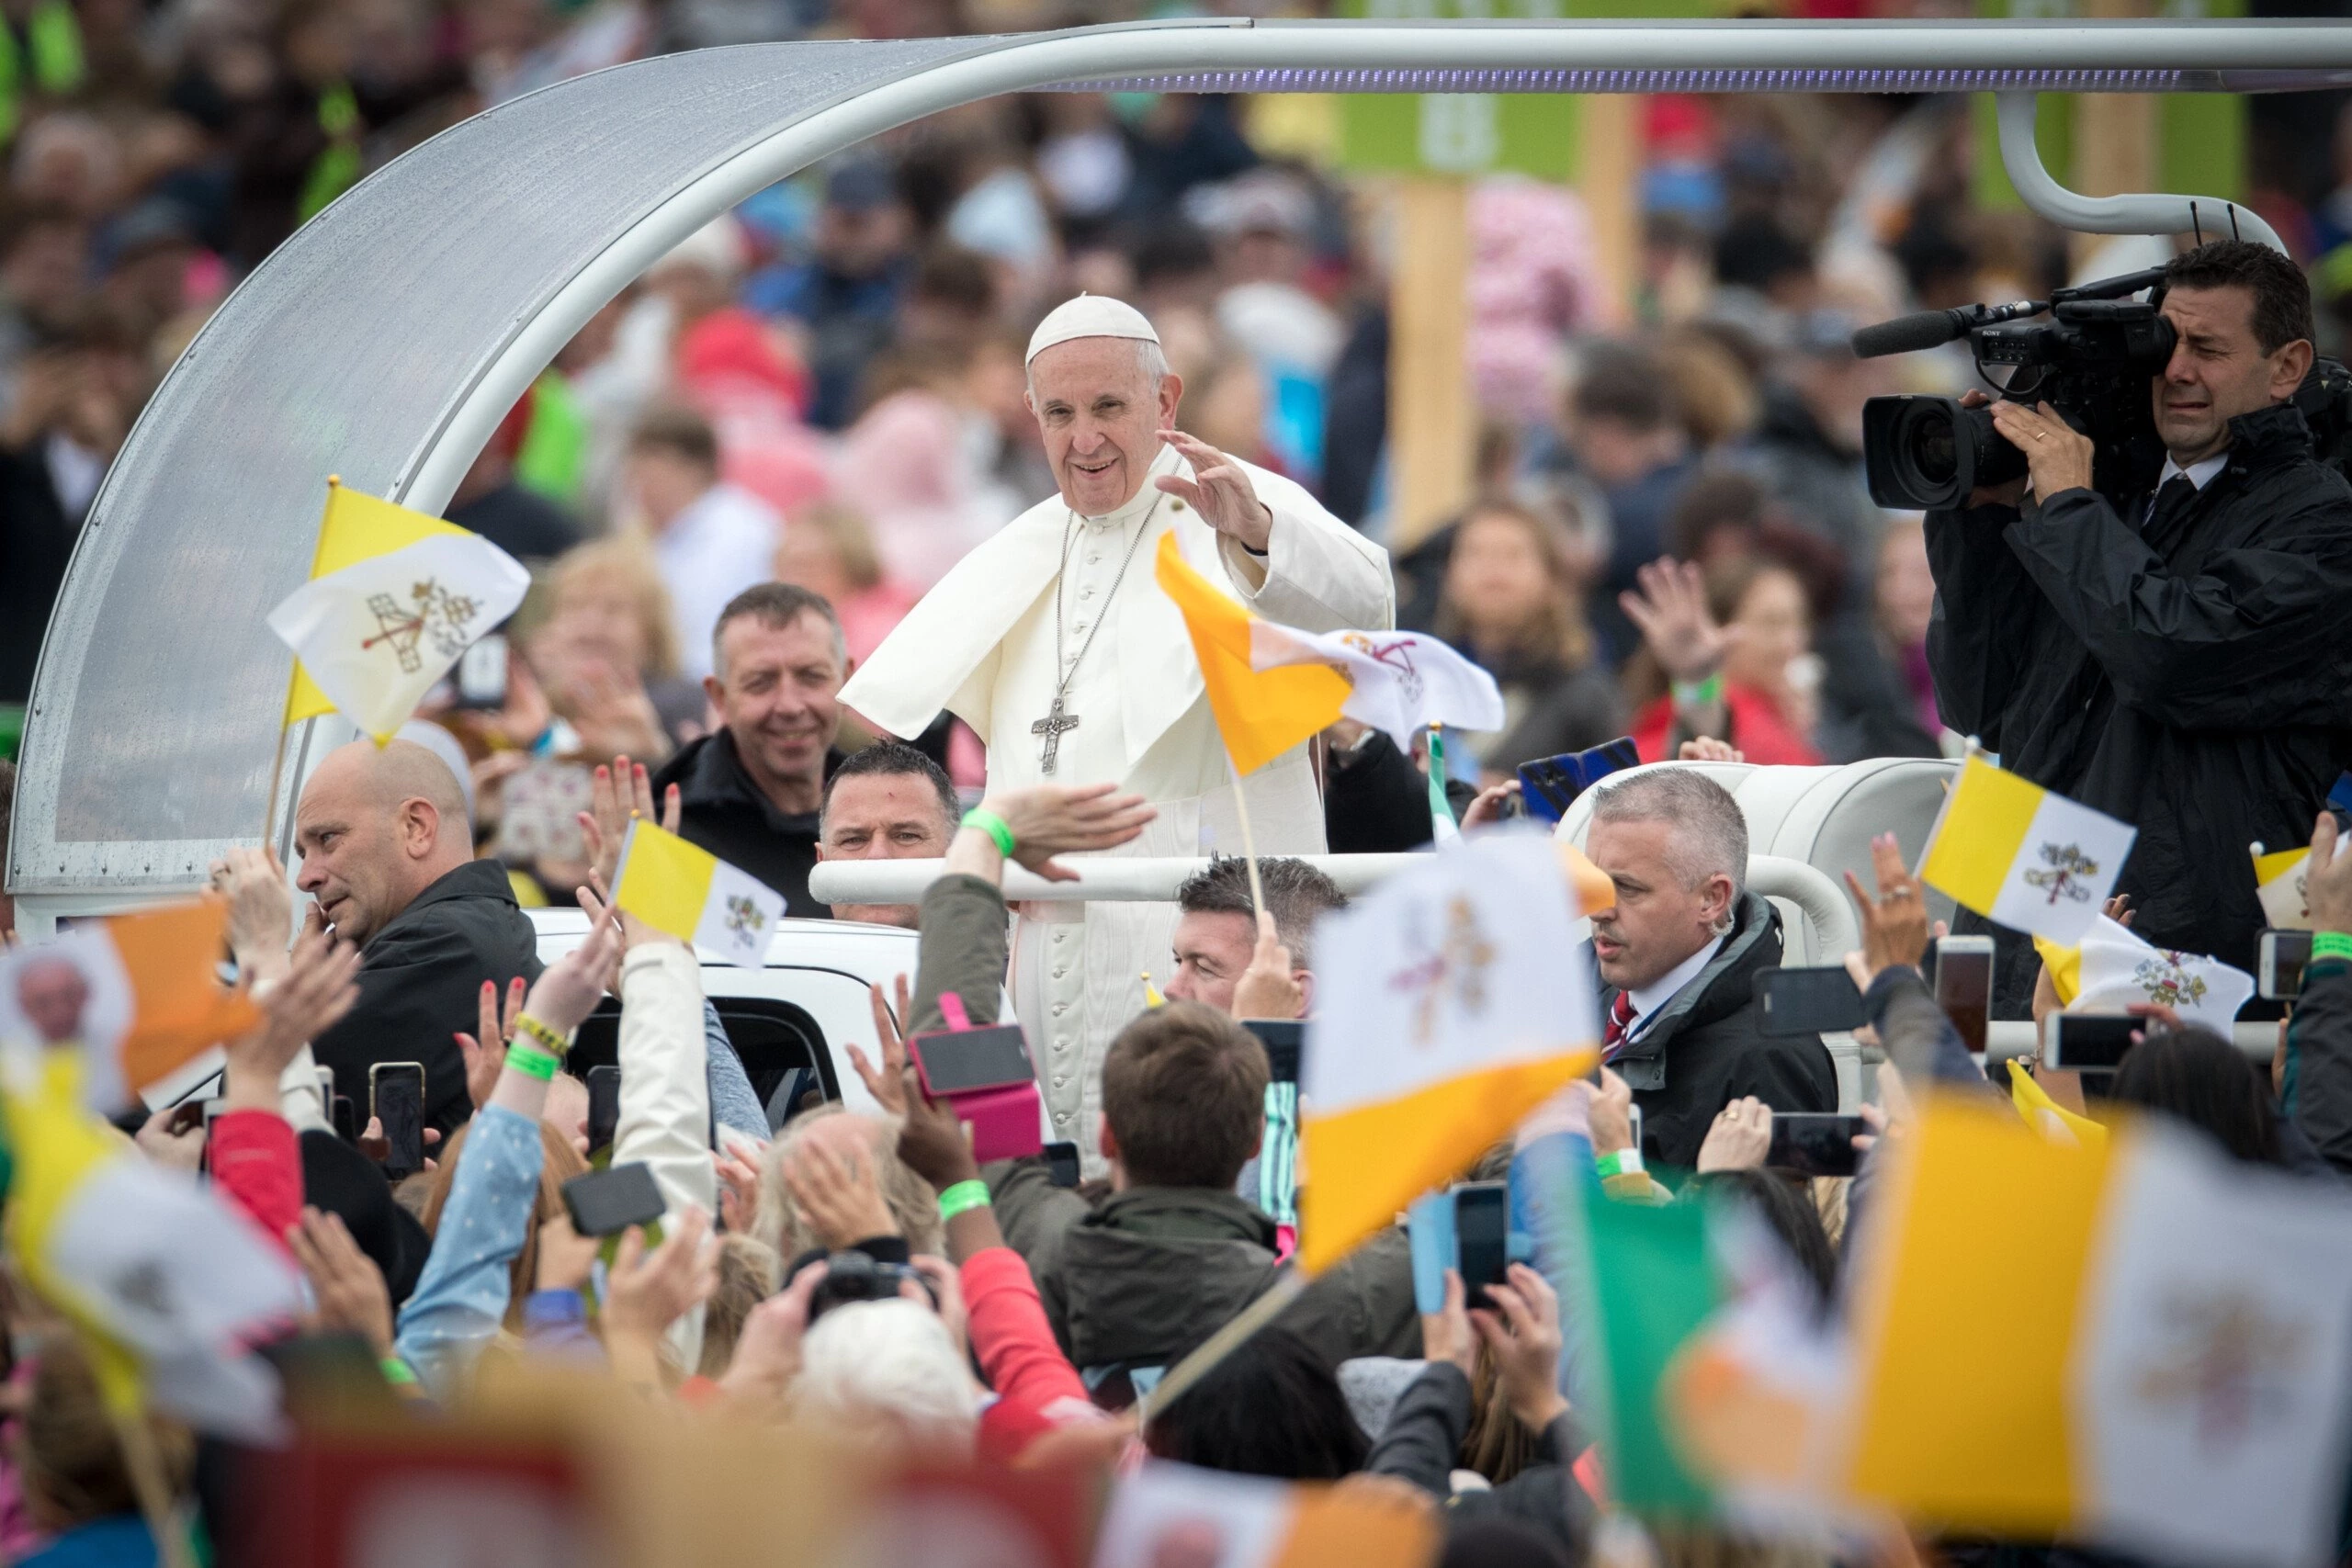 DUBLIN, IRELAND - AUGUST 26:  Pope Francis arrives as people gather for the Closing Mass in Phoenix Park on August 26, 2018 in Dublin, Ireland. A congregation of approximately 500,000 people have gathered in Phoenix Park for the Closing Mass of the visit of Pope Francis to Ireland, centred on the Papal Cross in Phoenix Park, which was the site of the historic 1979 Papal Mass. Pope Francis is the 266th Catholic Pope and current sovereign of the Vatican. His visit, the first by a Pope since John Paul II's in 1979, is expected to attract hundreds of thousands of Catholics to a series of events in Dublin and Knock. During his visit he will have private meetings with victims of sexual abuse by Catholic clergy. (Photo by Matt Cardy/Getty Images)